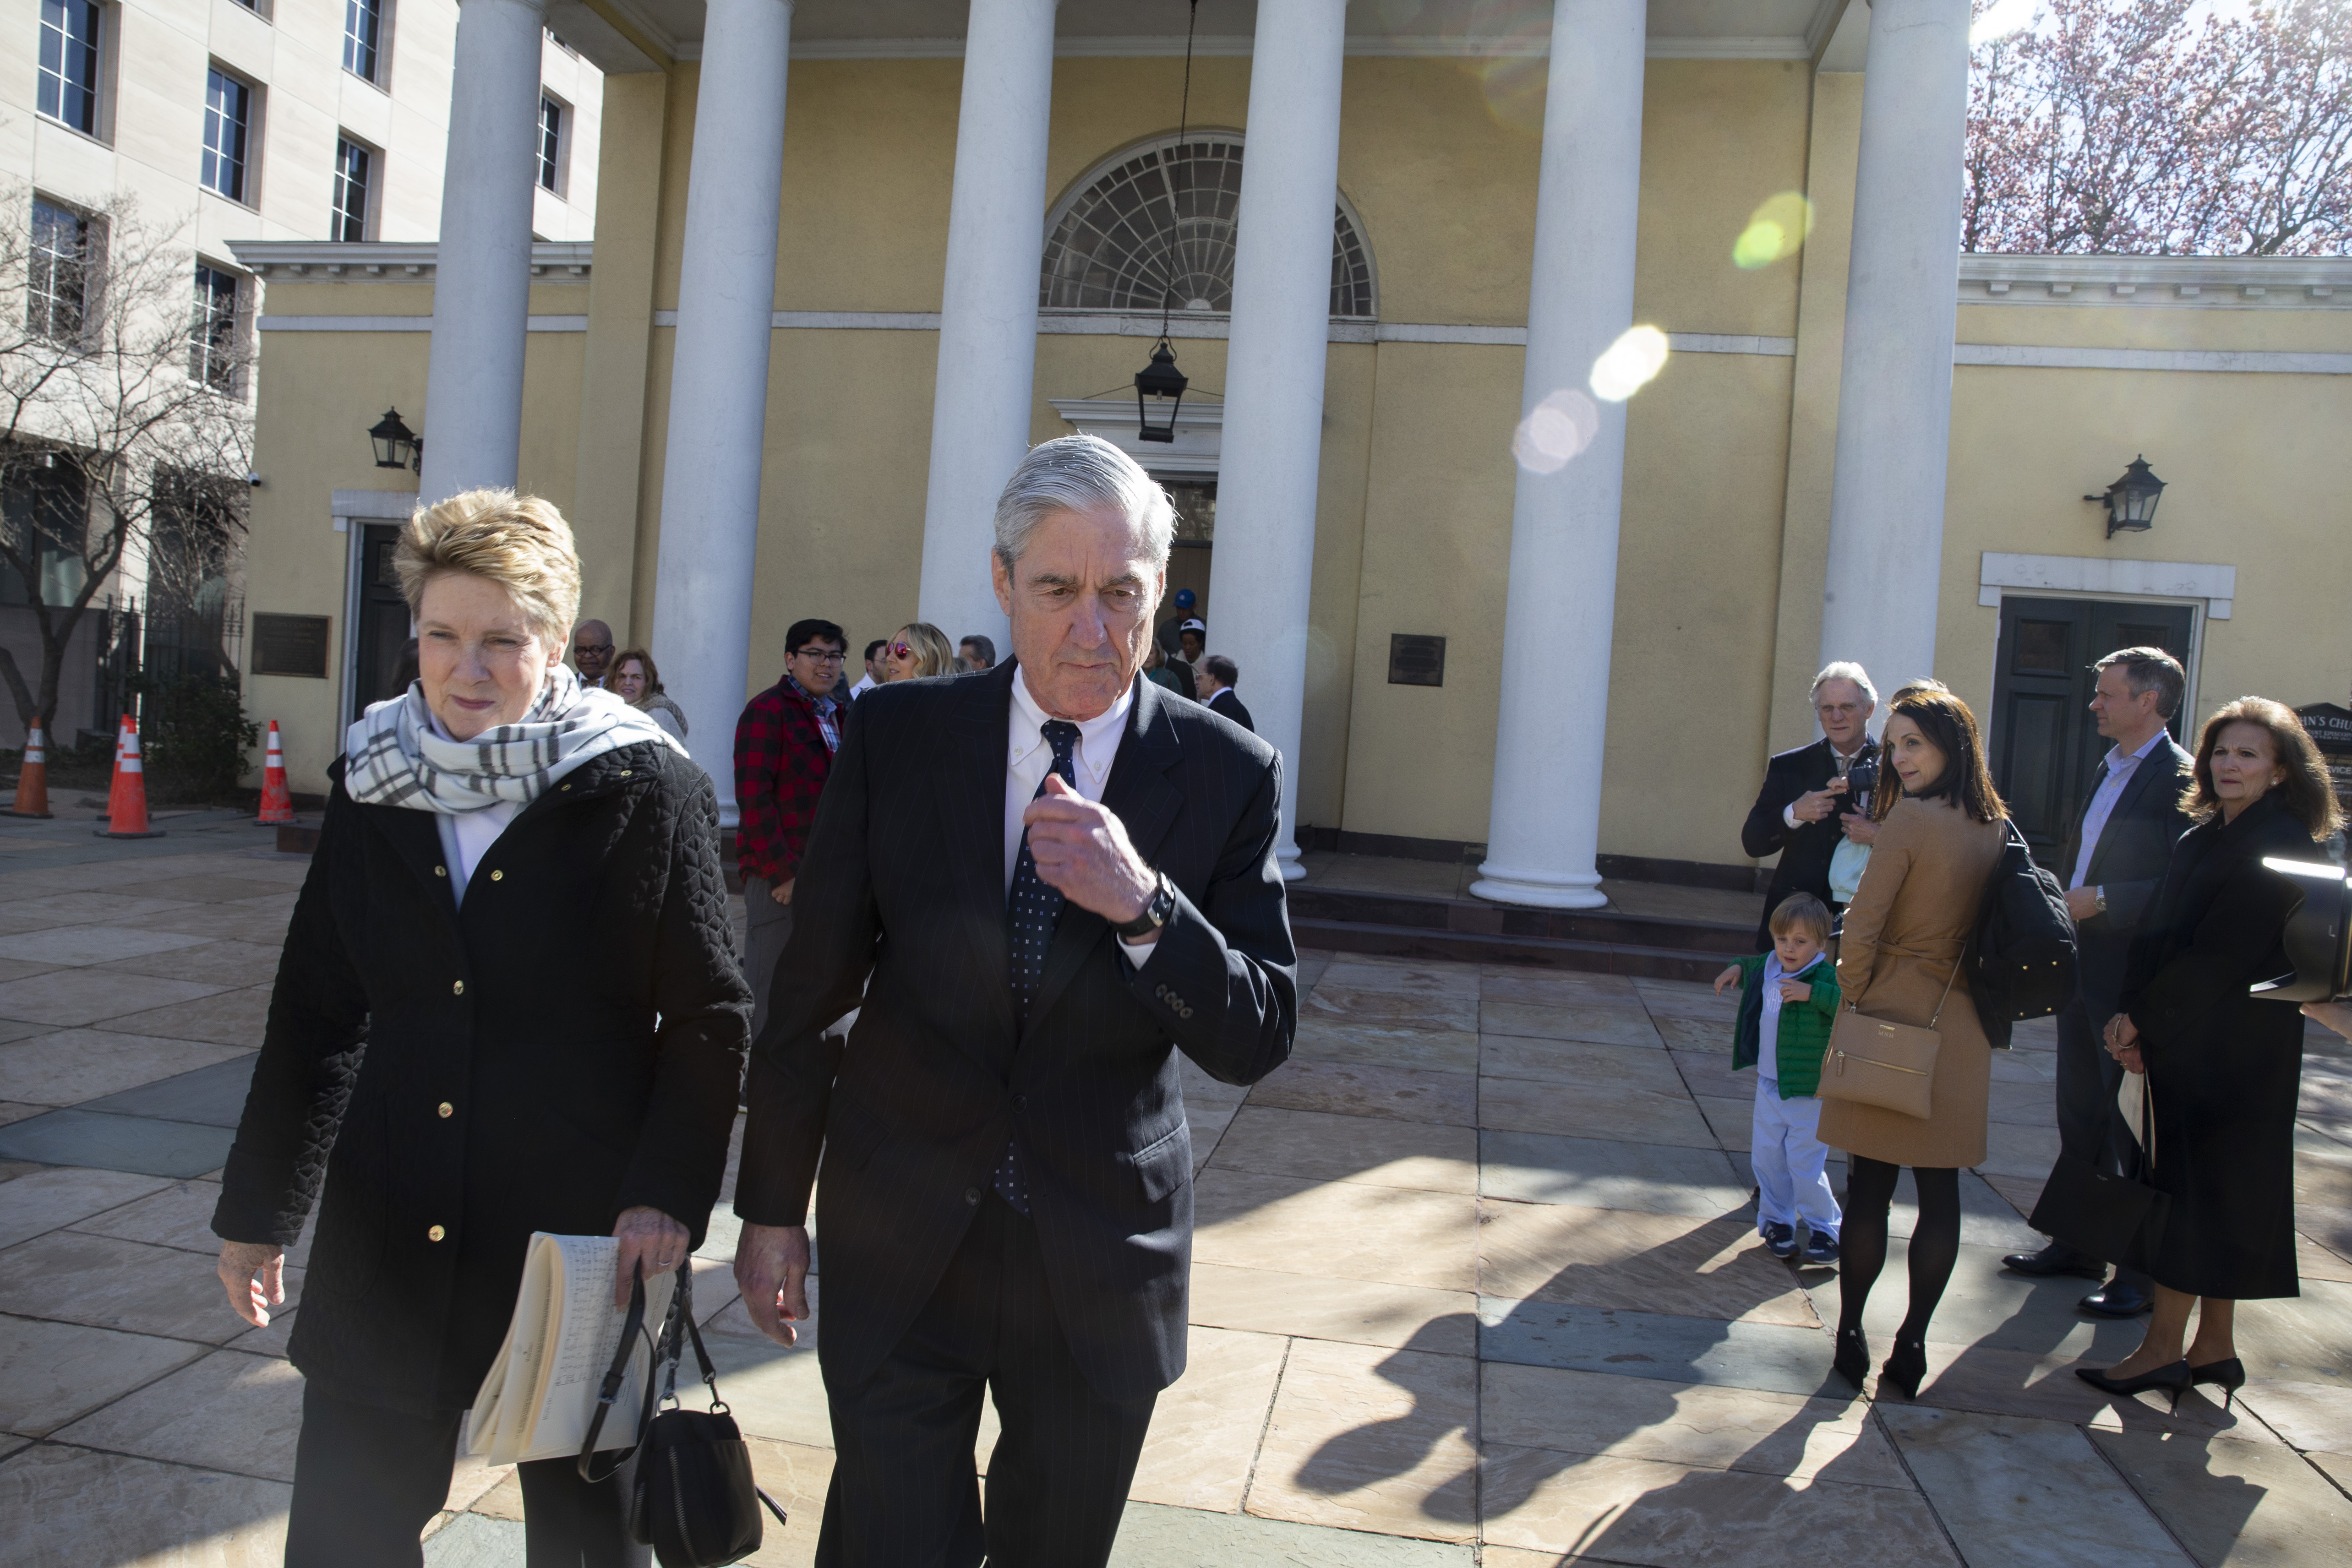 Special counsel Robert Mueller walks with his wife Ann Mueller on March 24, 2019 in Washington, DC. (Photo by Tasos Katopodis/Getty Images)